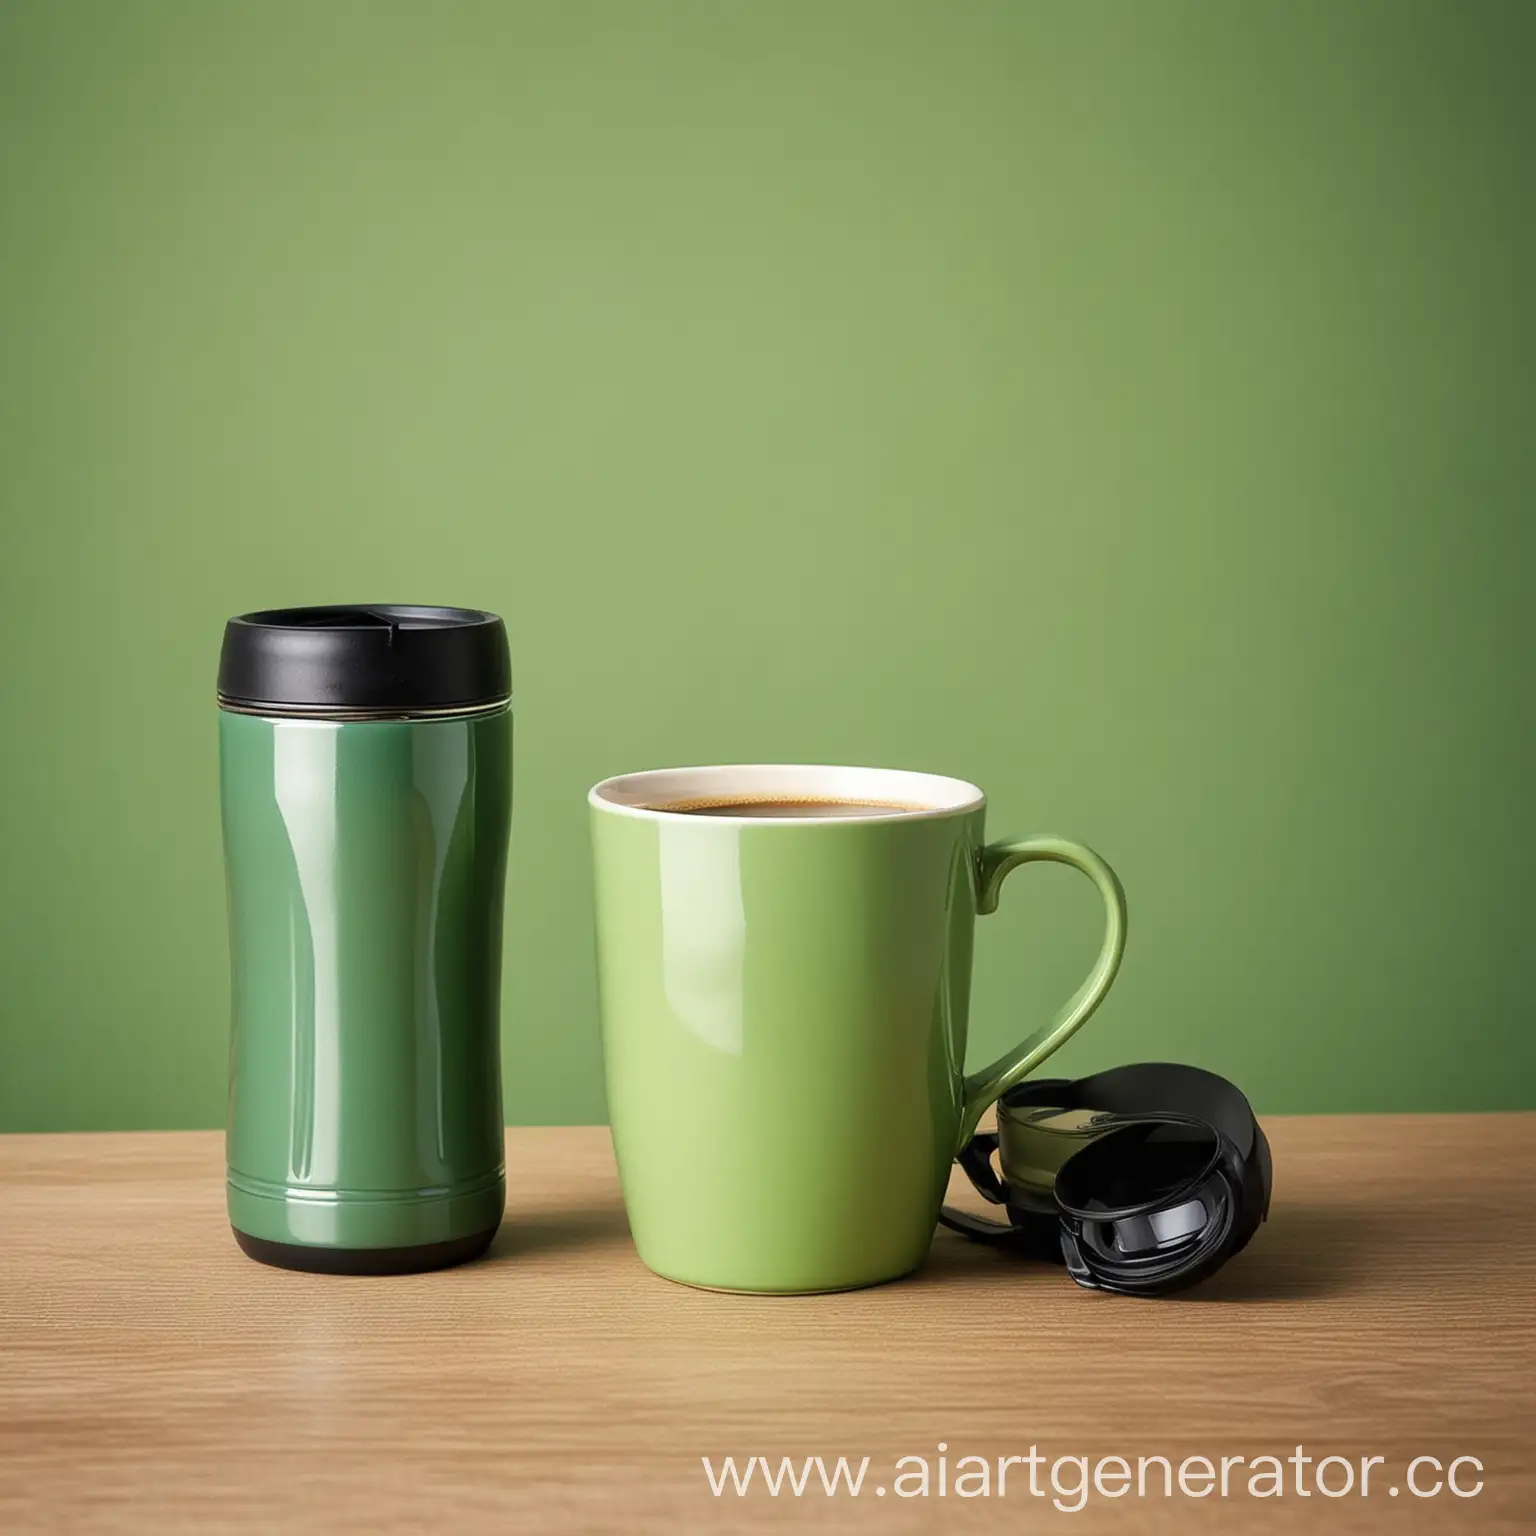 Coffee-Cup-and-Thermos-on-Table-with-Green-Background